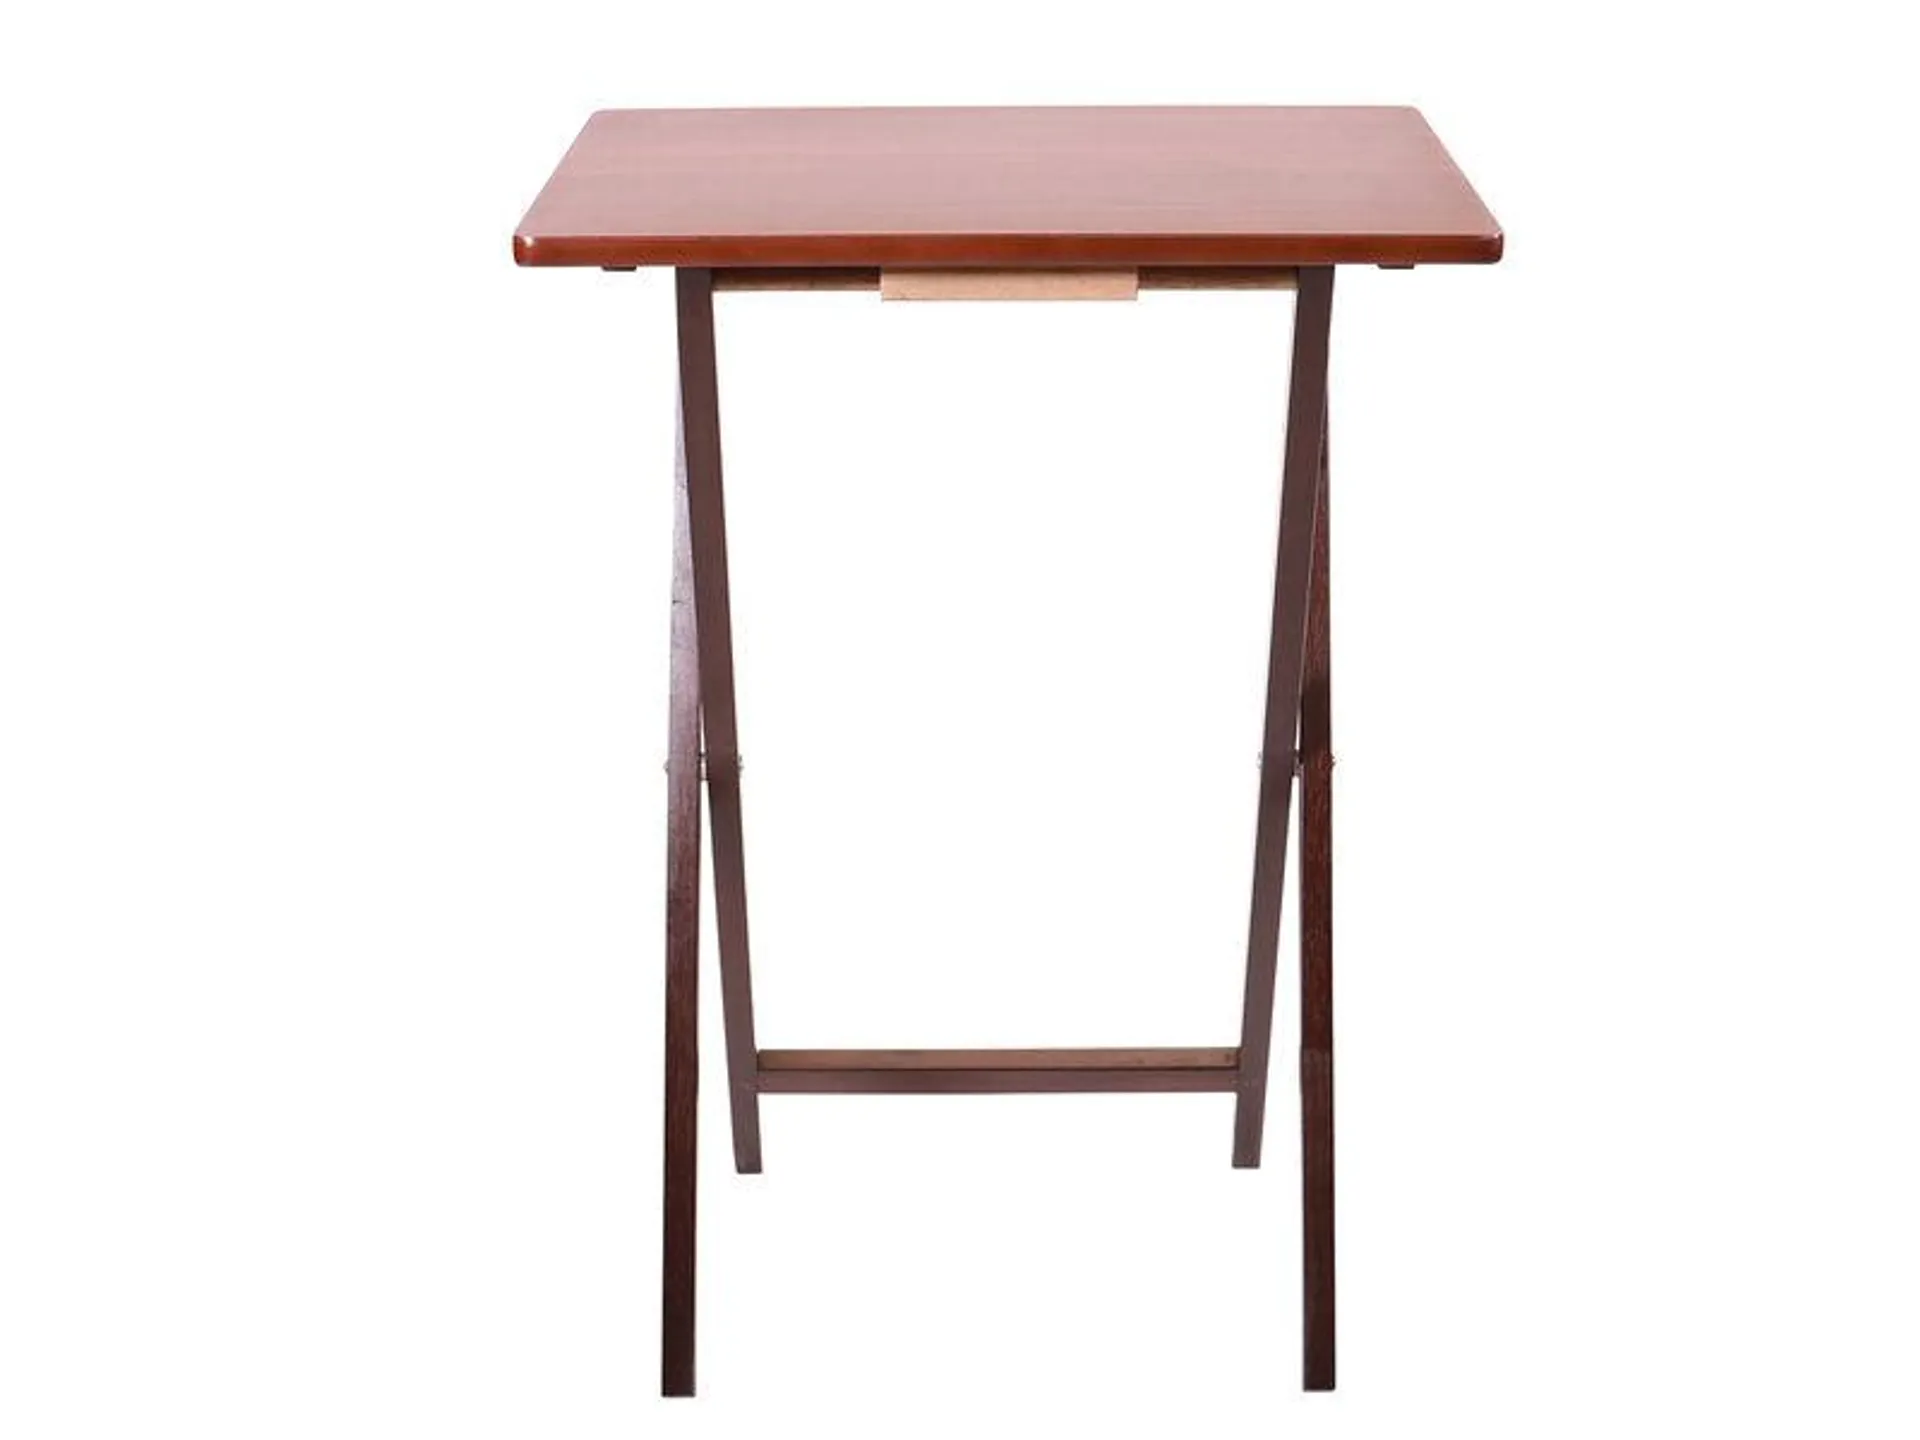 19 in. L X 14.5 in. W Wood Folding Table (Set of 4 Tables and 1 Stand)